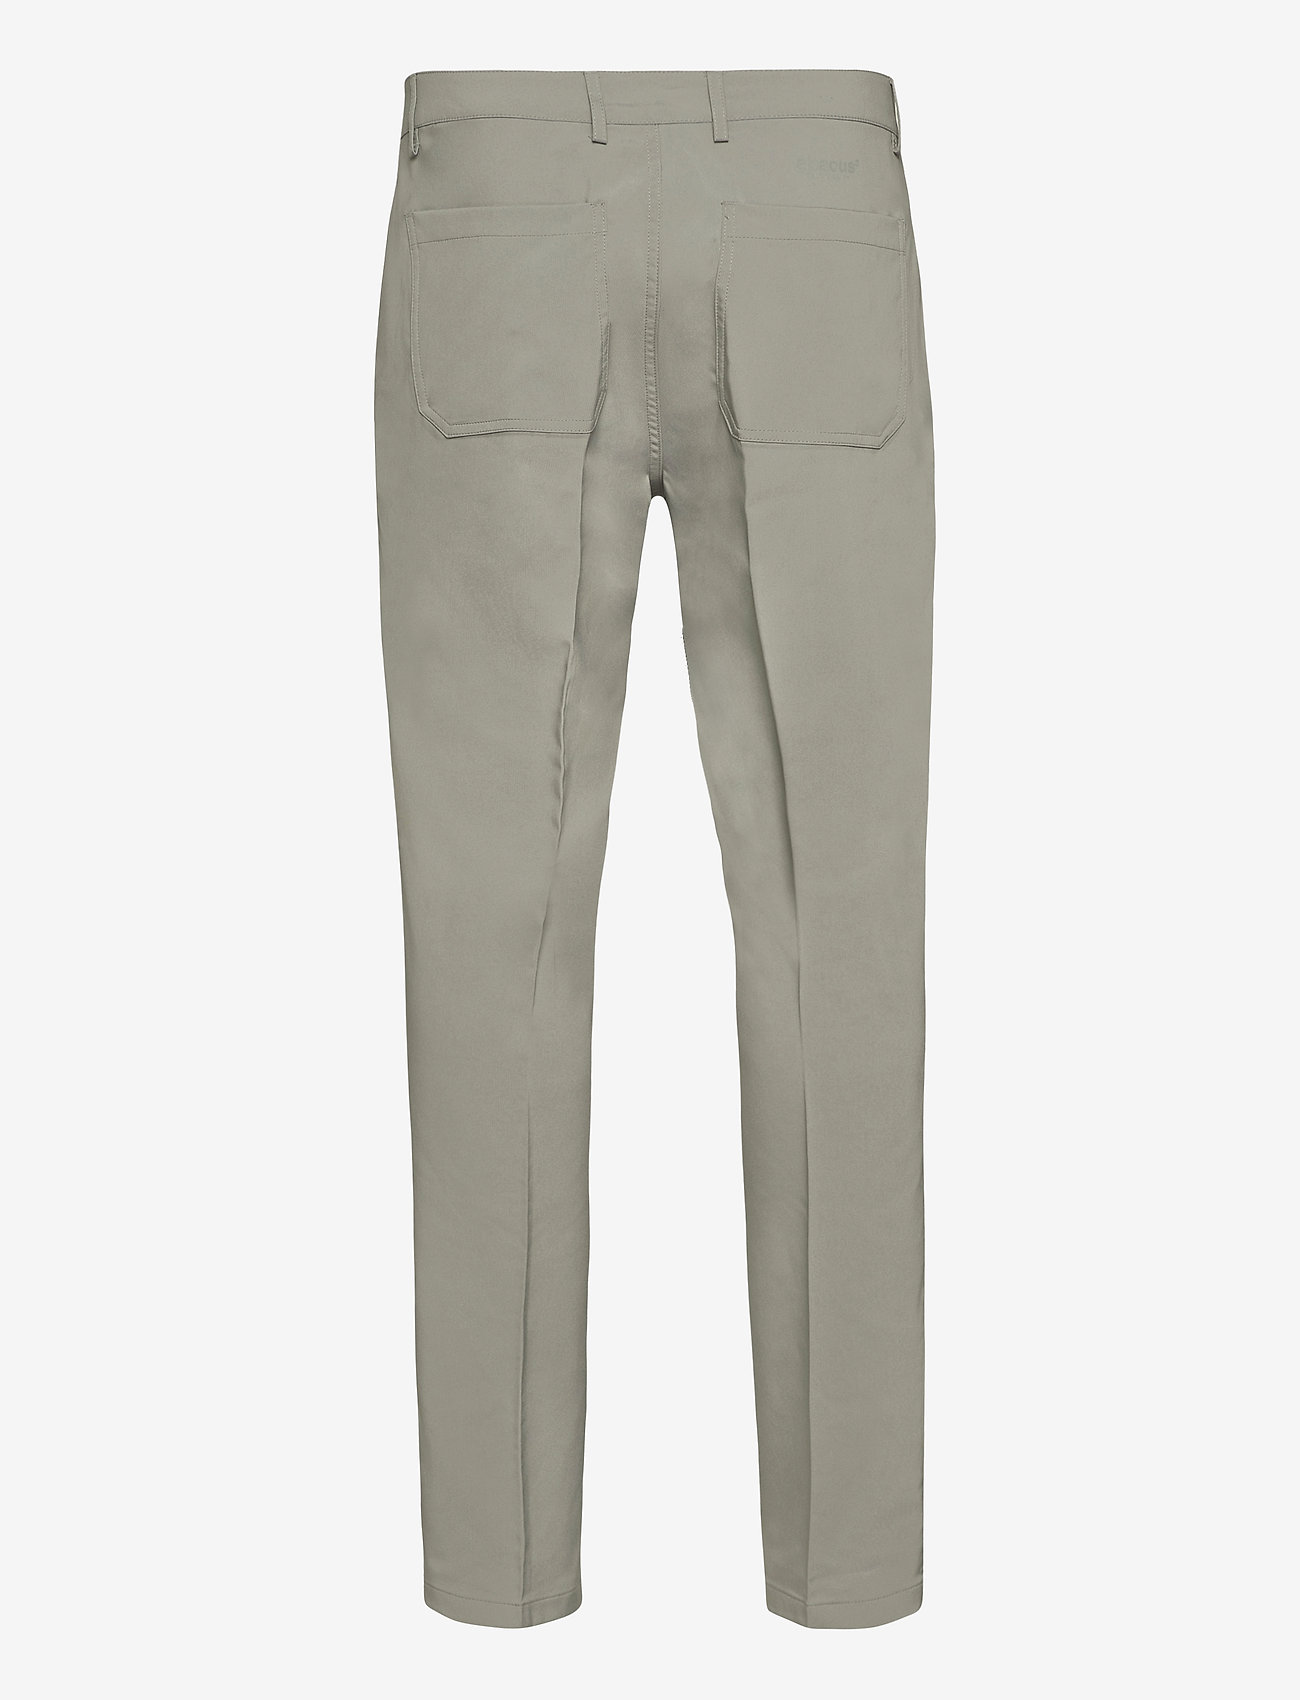 Abacus - Mens Cleek stretch trousers - golfbukser - grey - 1